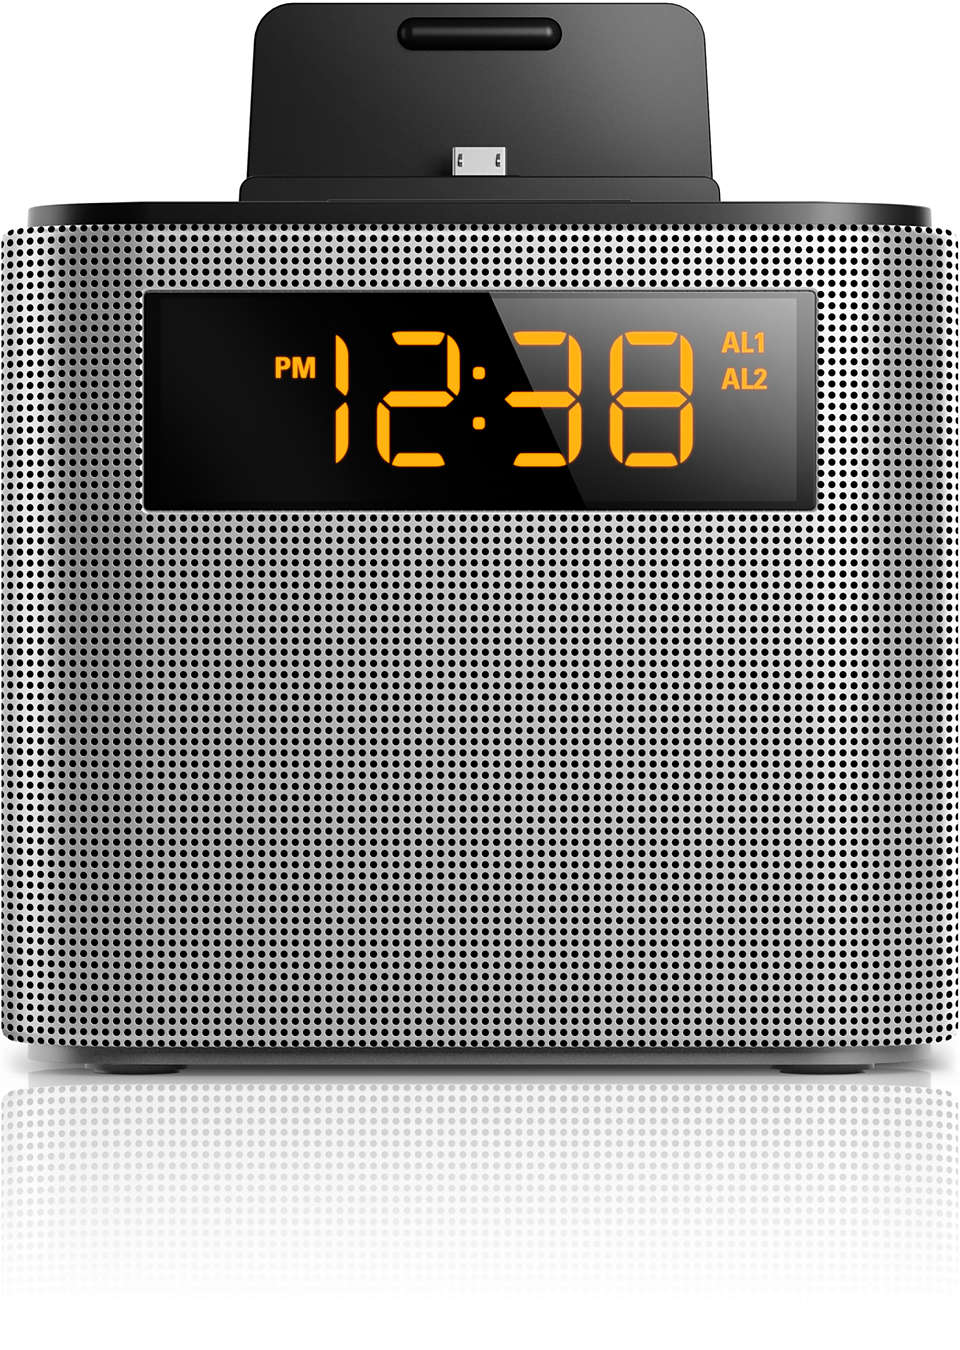 Wake up to FM radio and a smartphone fully charged